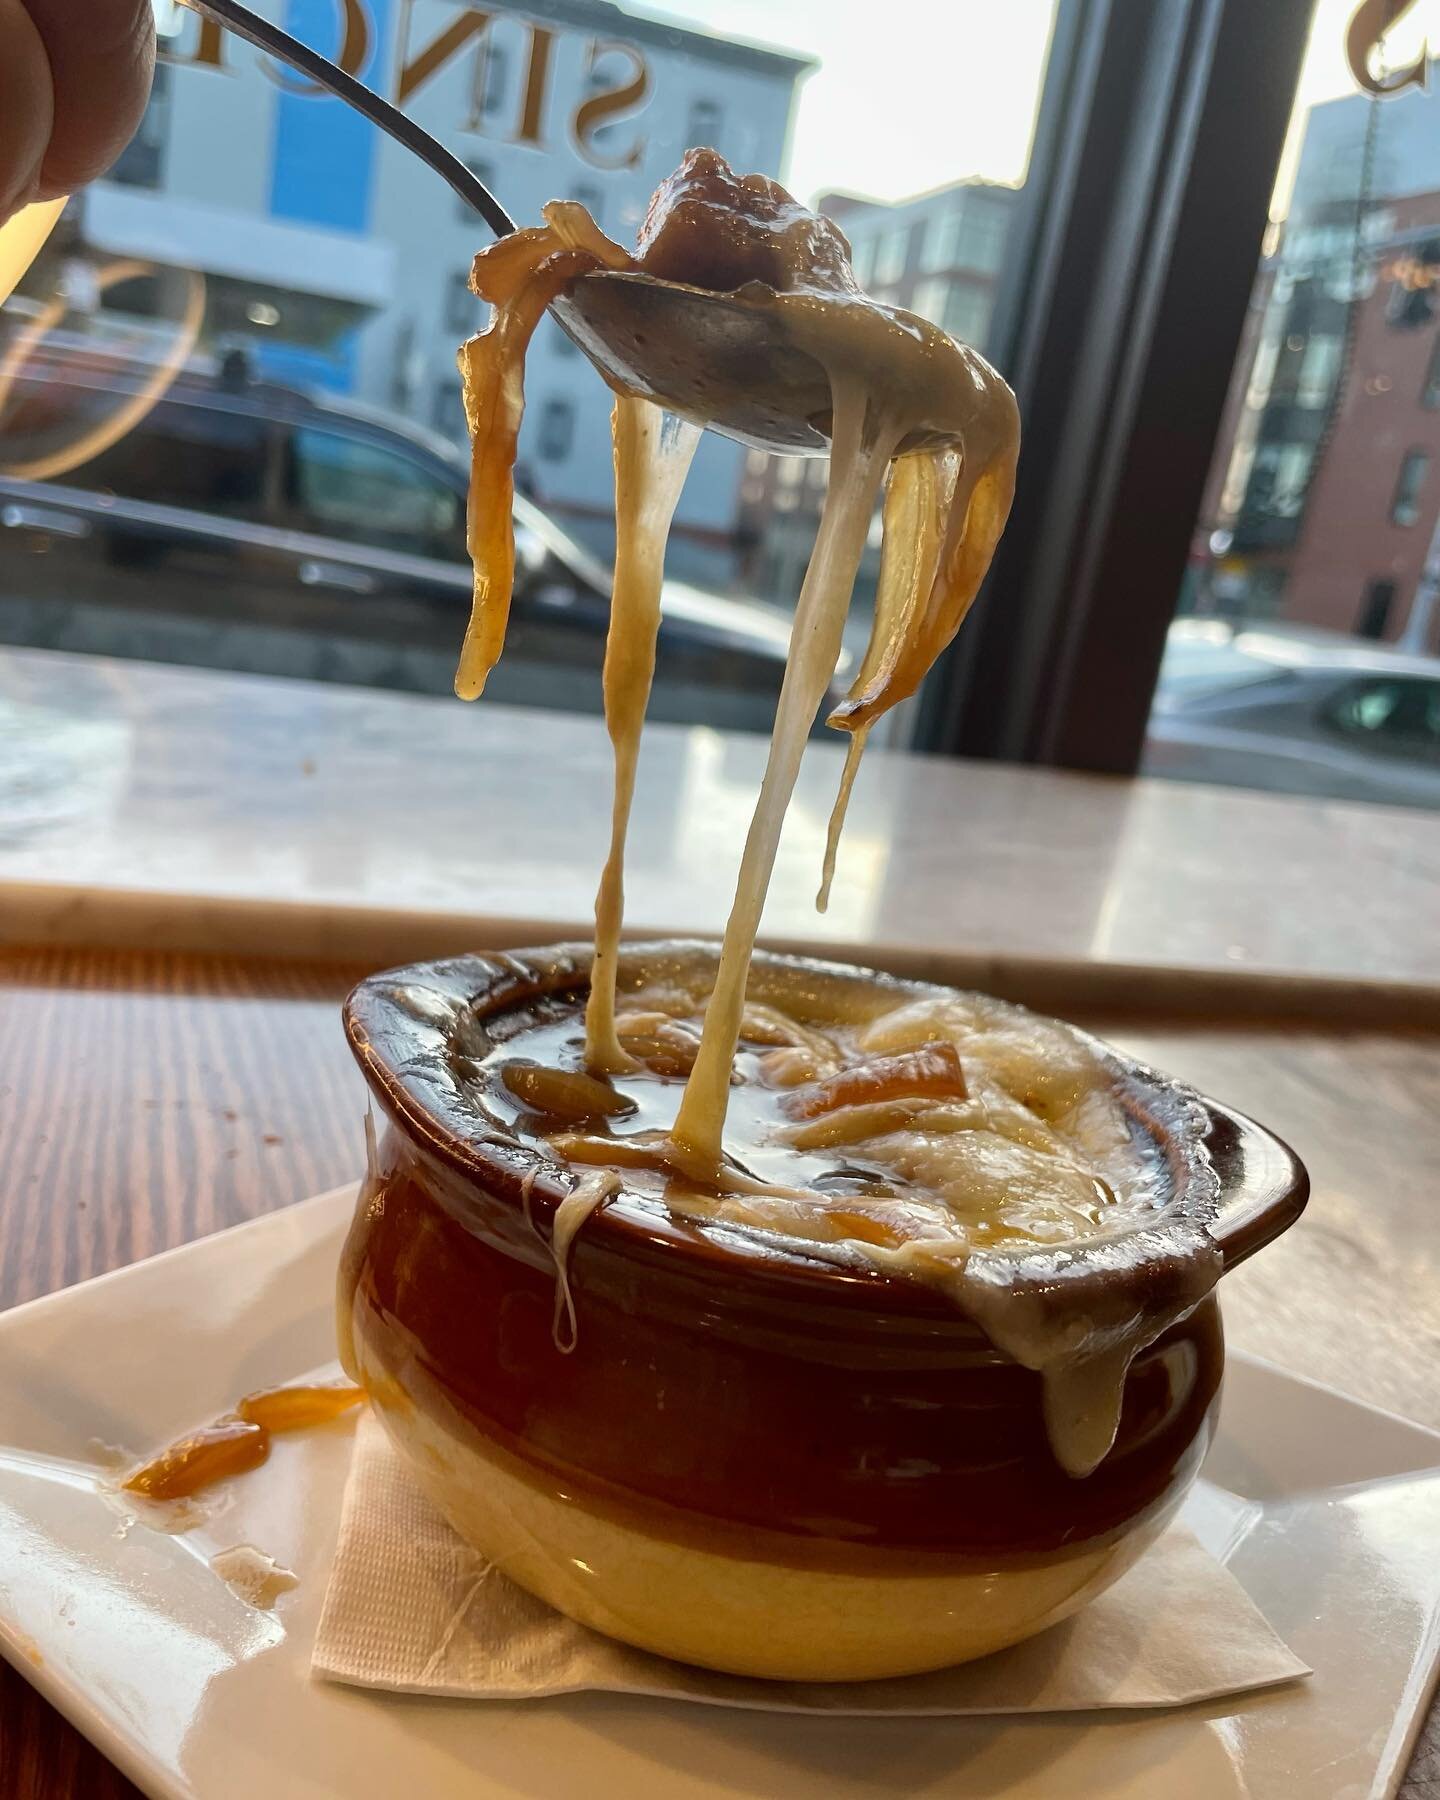 What better way to warm up than with our delicious French Onion Soup!
.
.
.
.
#bostonbreakfast #bostonbrunch #southie #foodiesofinstagram #eats #instacool #foodstagram #instafood #foodpic #foodgasm #delicious #foodoftheday #foodpics